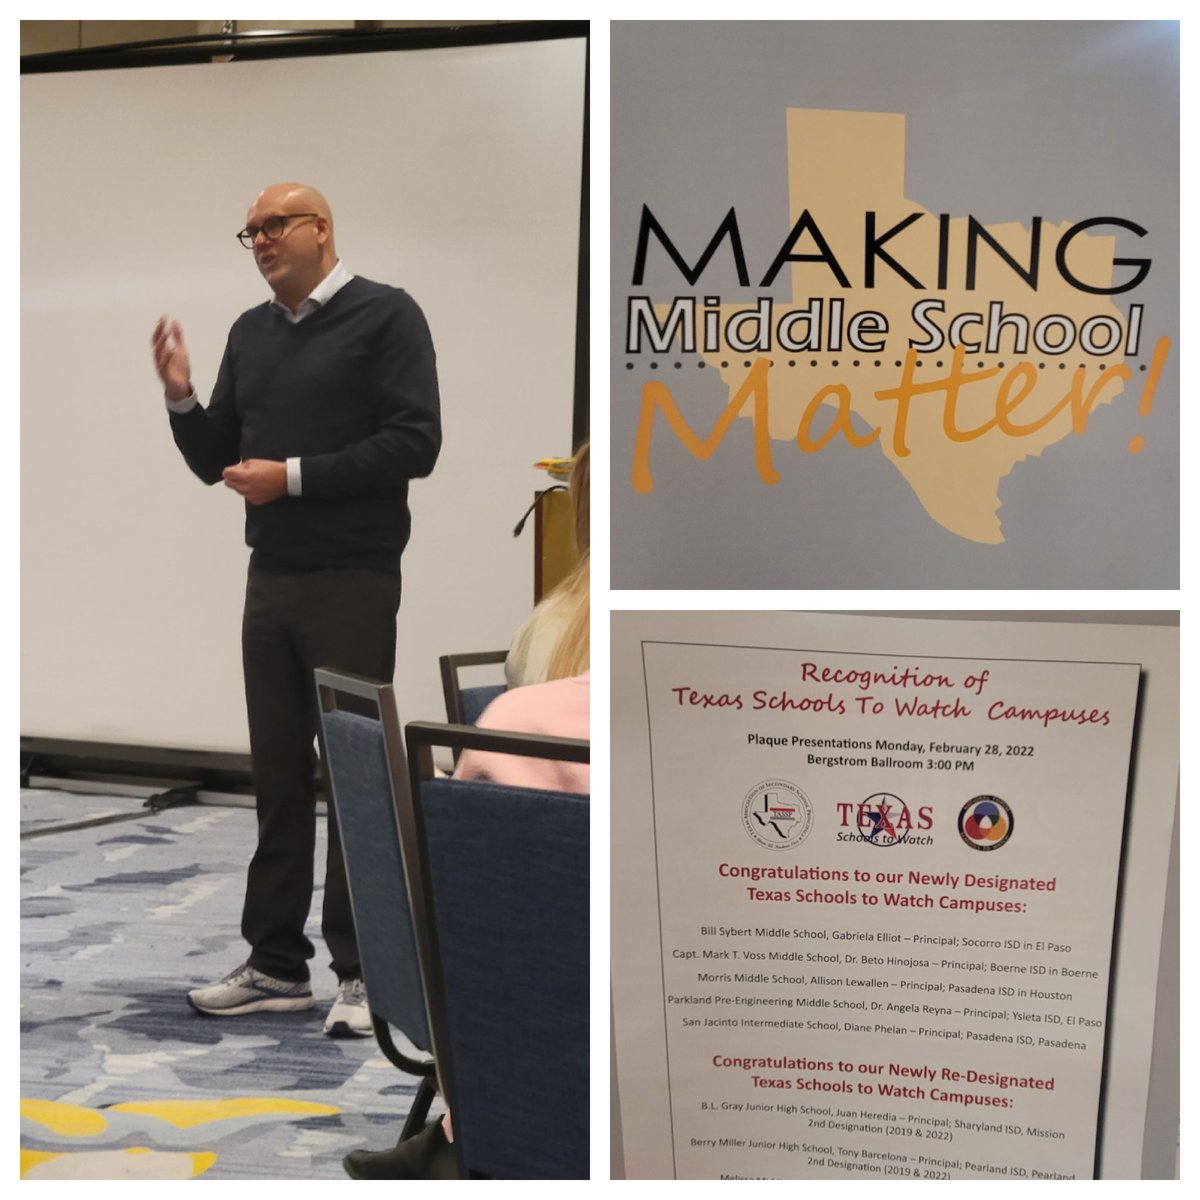 Amazing first day of the Middle School Matters Symposium!! Learning new things to share with my Vossome faculty! Jeff Berckmeyer is FABULOUS!! #growthwins @JBerckemeyer @BoerneISD @VossMiddle @PrincipalBeto